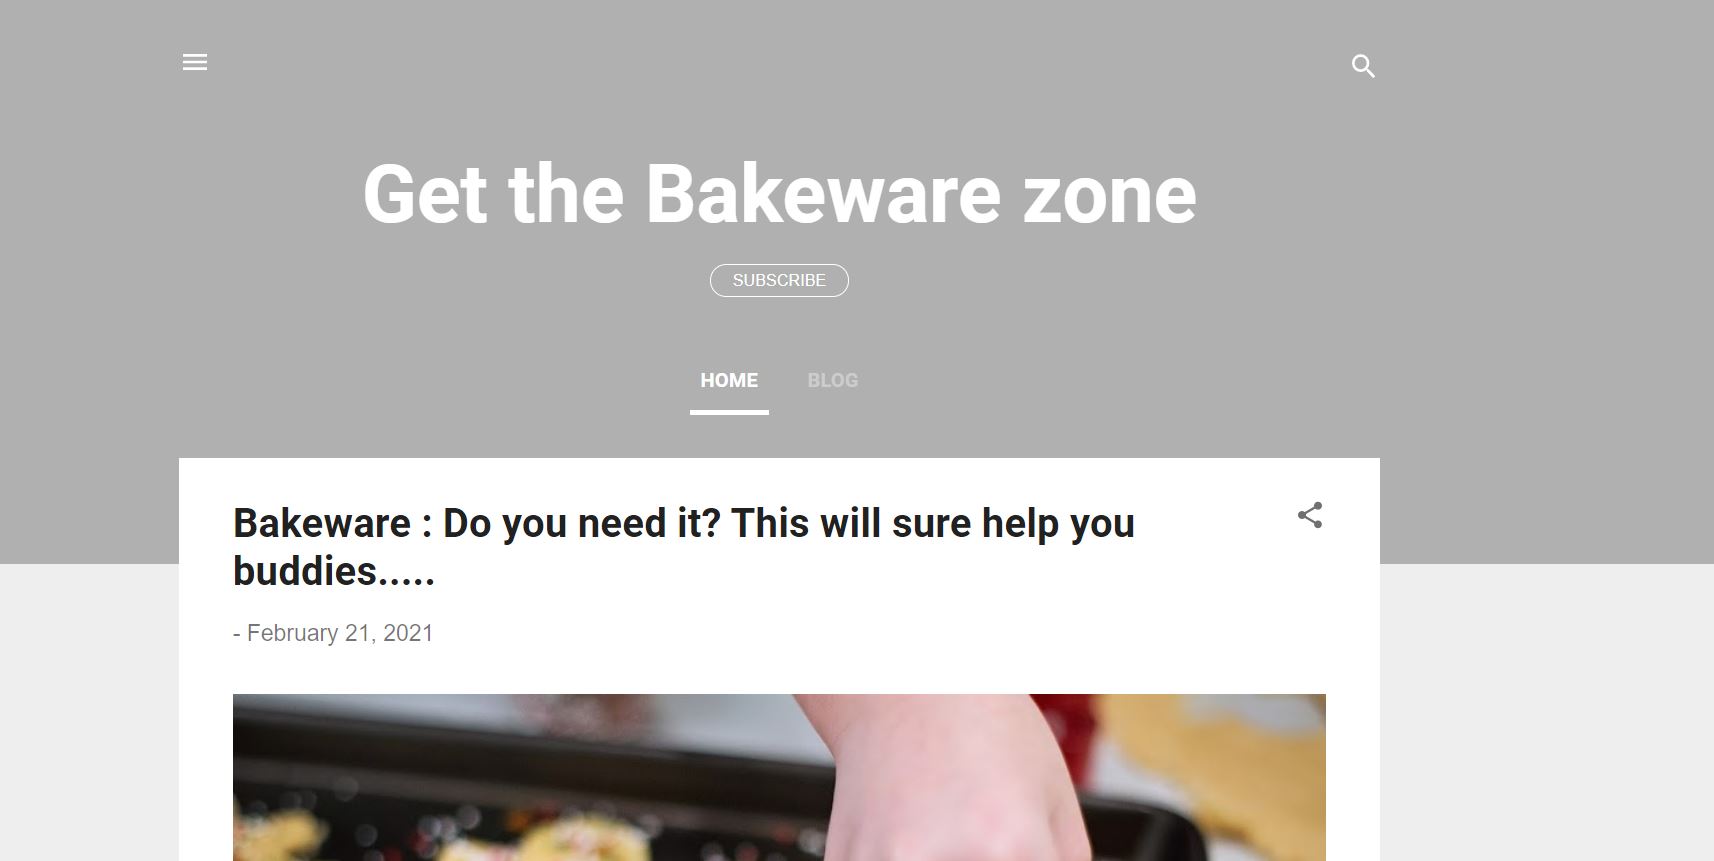 Get the Bakeware Zone